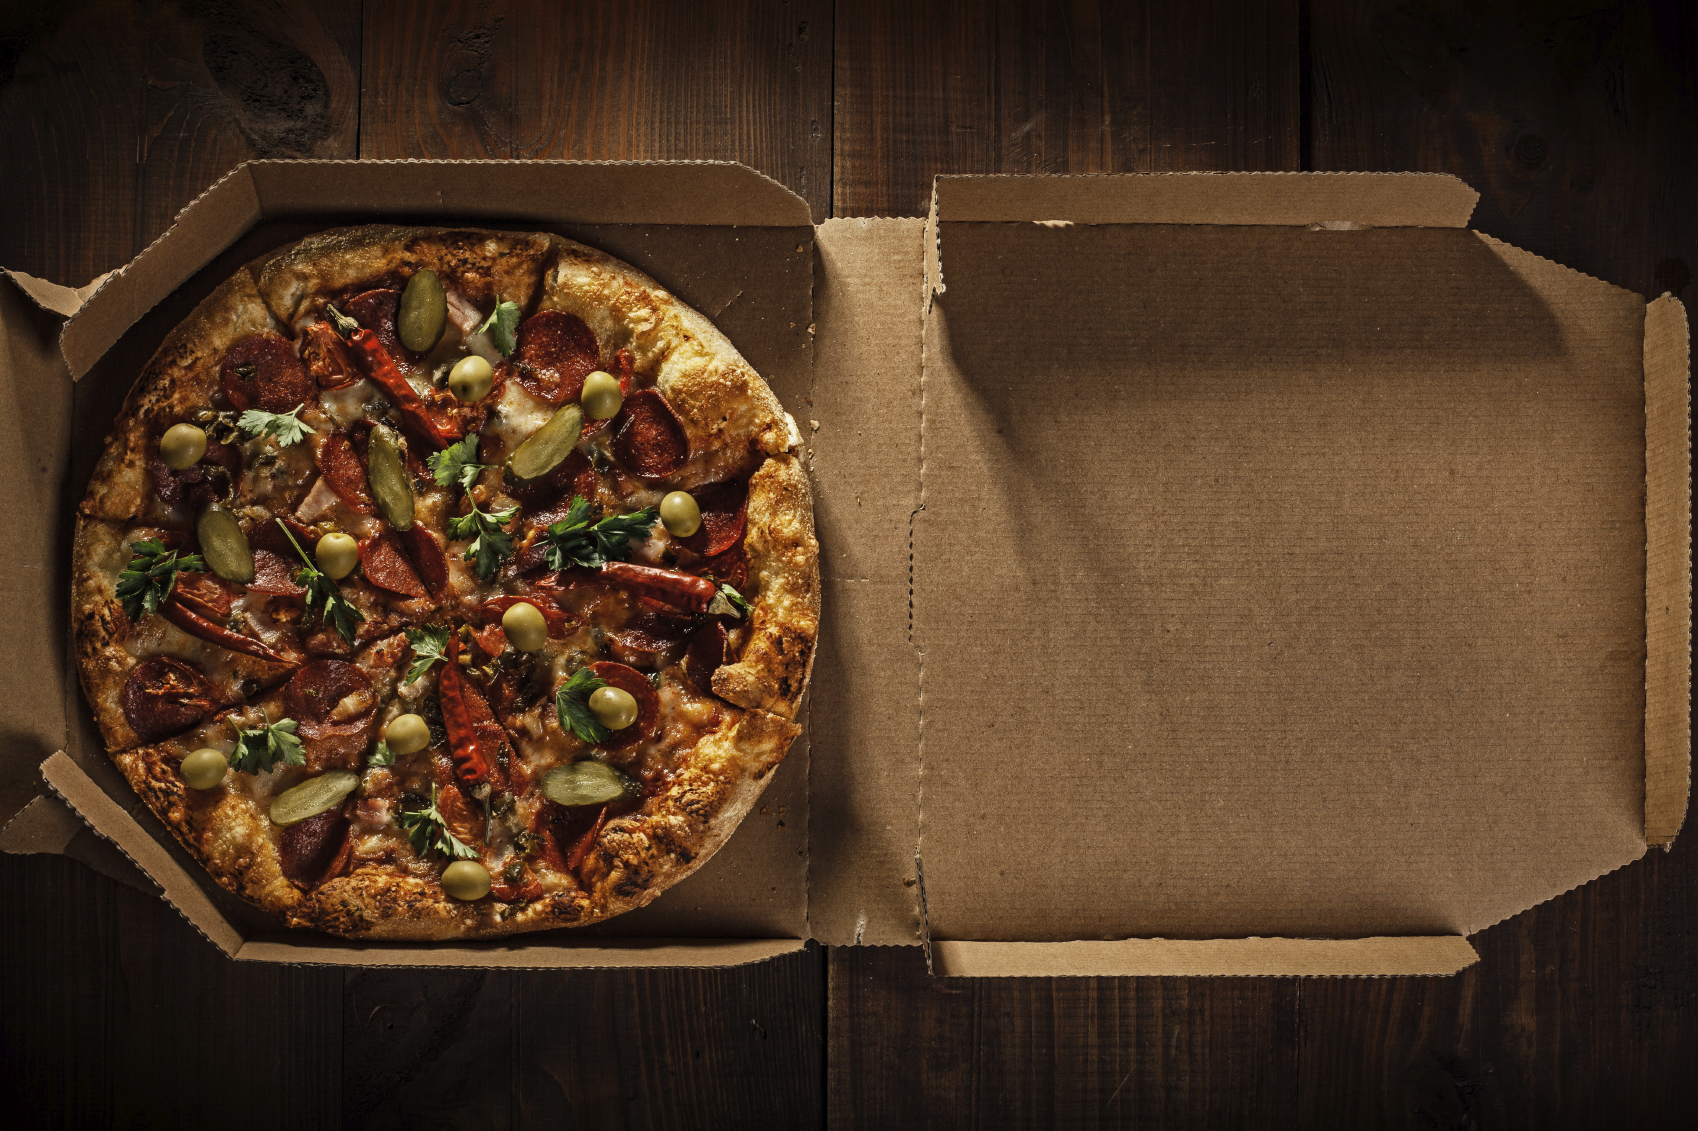 Pizza delivery boxes contain toxic chemicals that have been banned by the FDA.